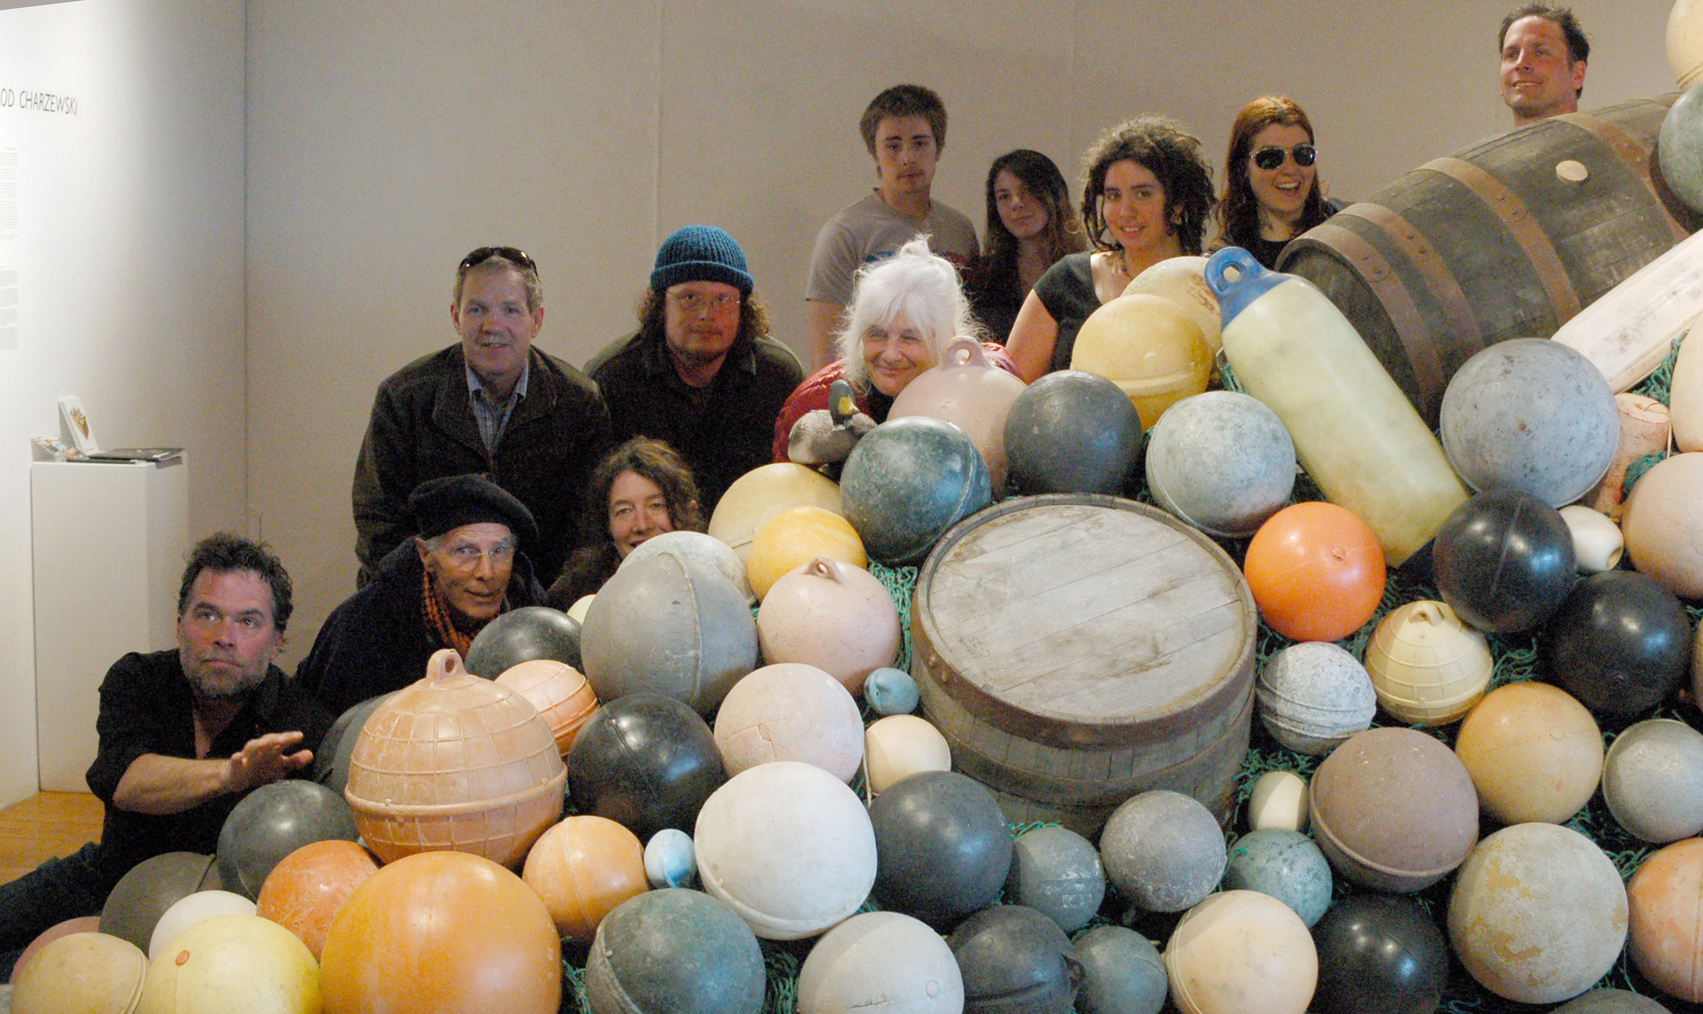 Old Town Artist in Residence Jarod Charzewski, upper right, poses with some of the people who helped create “Buoys and Barrels,” a community art project, last Friday at Bunnell Street Arts Center. From left to right are Michael Walsh, Peter Kauffman, Carl Bice, Asia Freeman, Jeremy Baugh , Wendy Erd, Darien Loftiem, Samantha Inman,  Desiree Hagen, Sarah Frary and Charzewski.-Photo by Michael Armstrong; Homer News